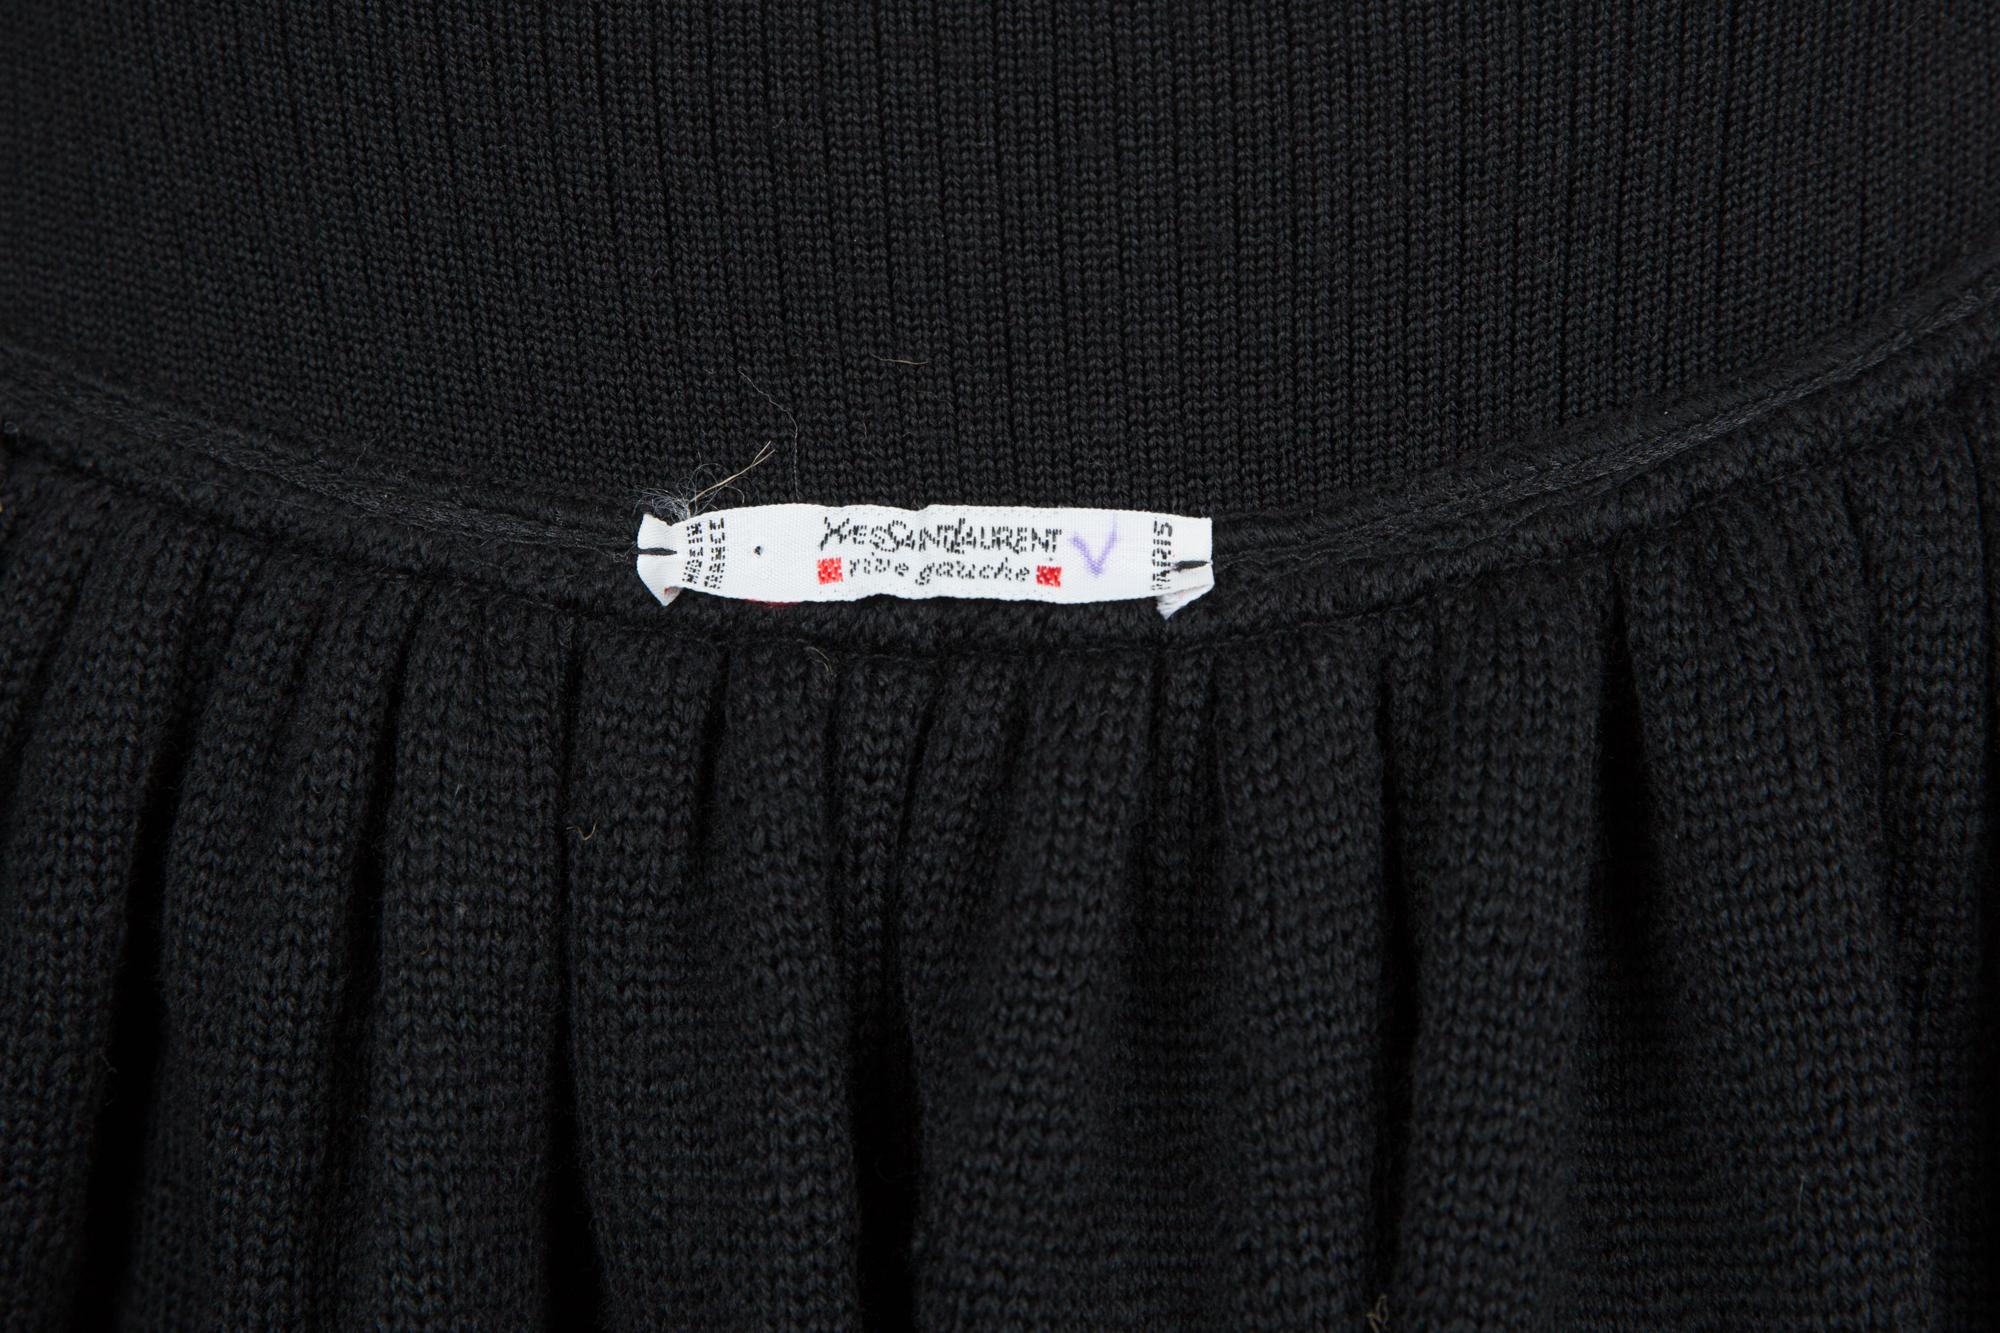 Yves Saint Laurent YSL black wool knitted skirt featuring a high-waisted bell skirt, a bicolor geometric hemline jacquard detail, a side zipper closing.   
Composition: Wool 100%
Circa 1990s
Estimated size 38fr/US6 /UK10
In good vintage condition.